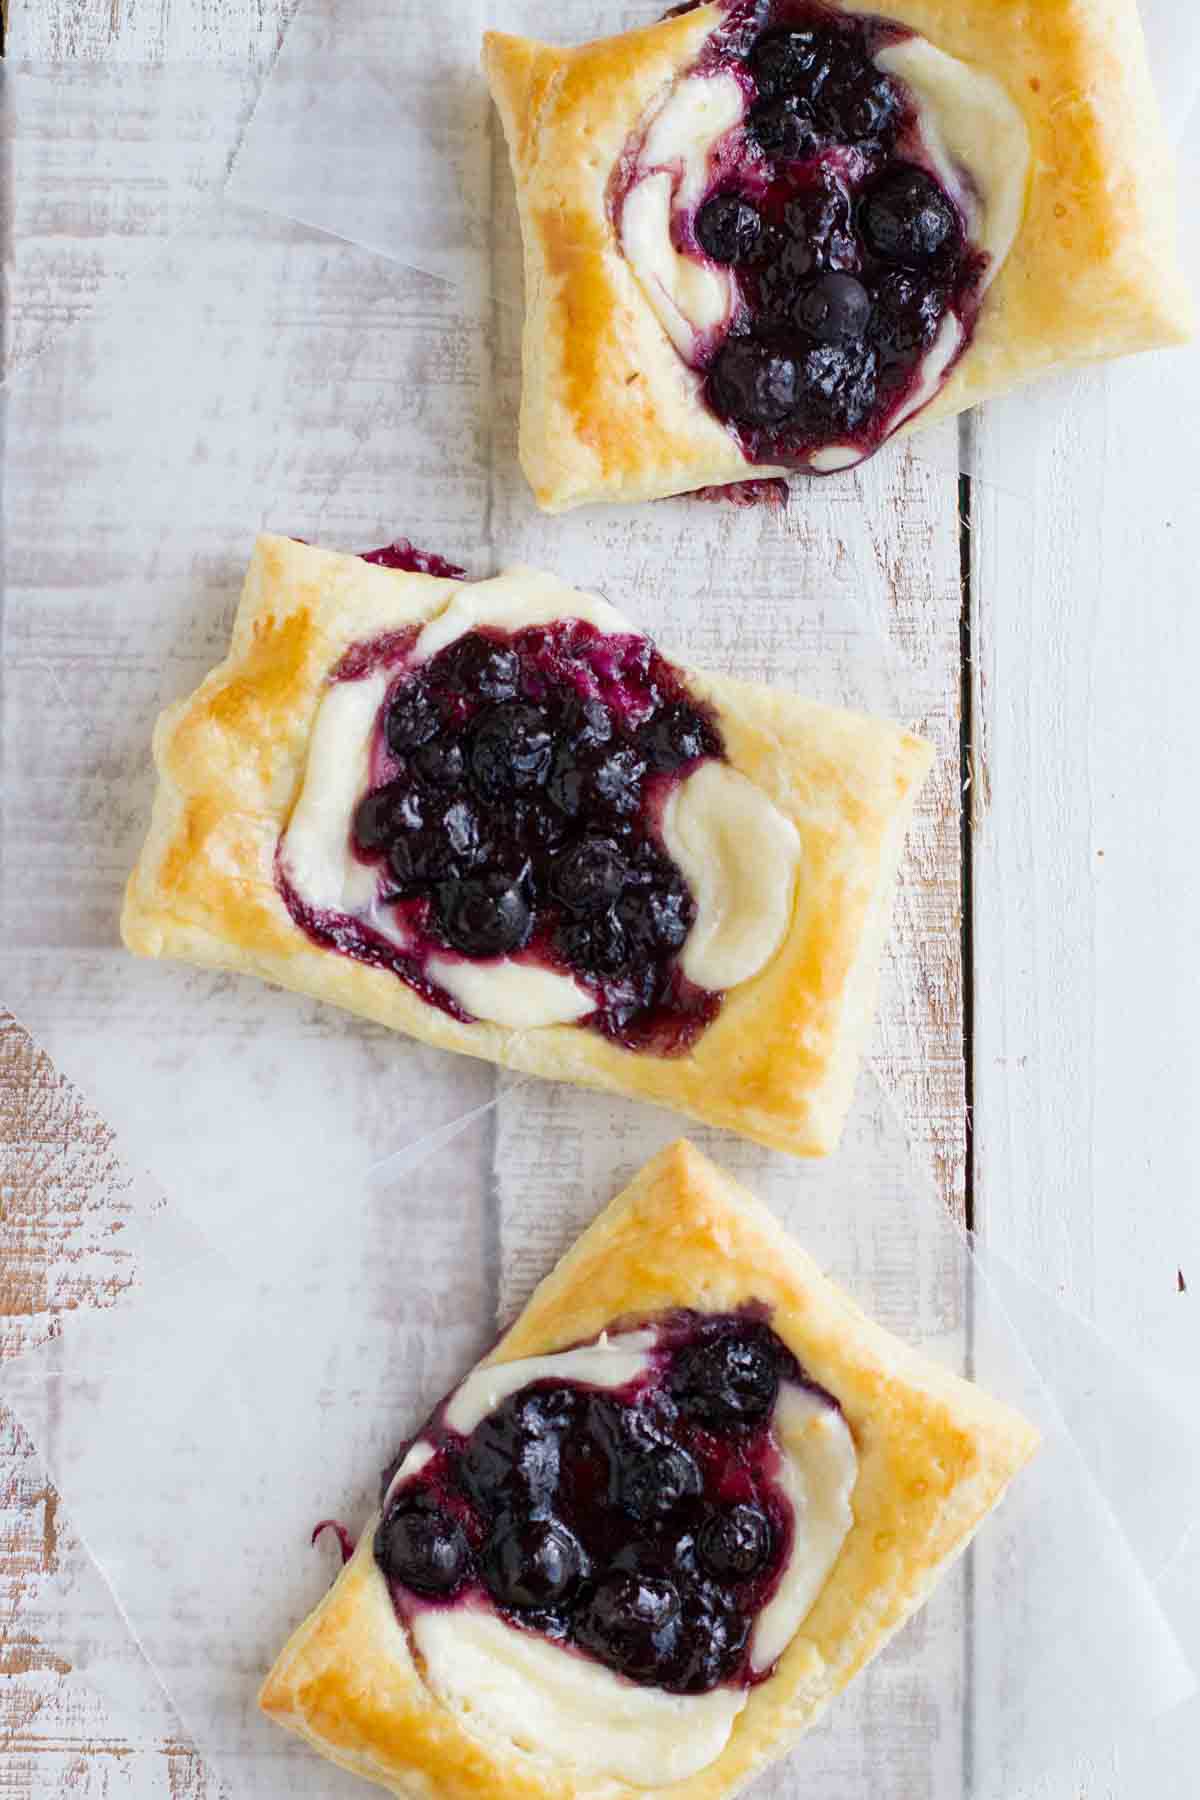 Top view showing puff pastry danish with cream cheese and blueberries on top.